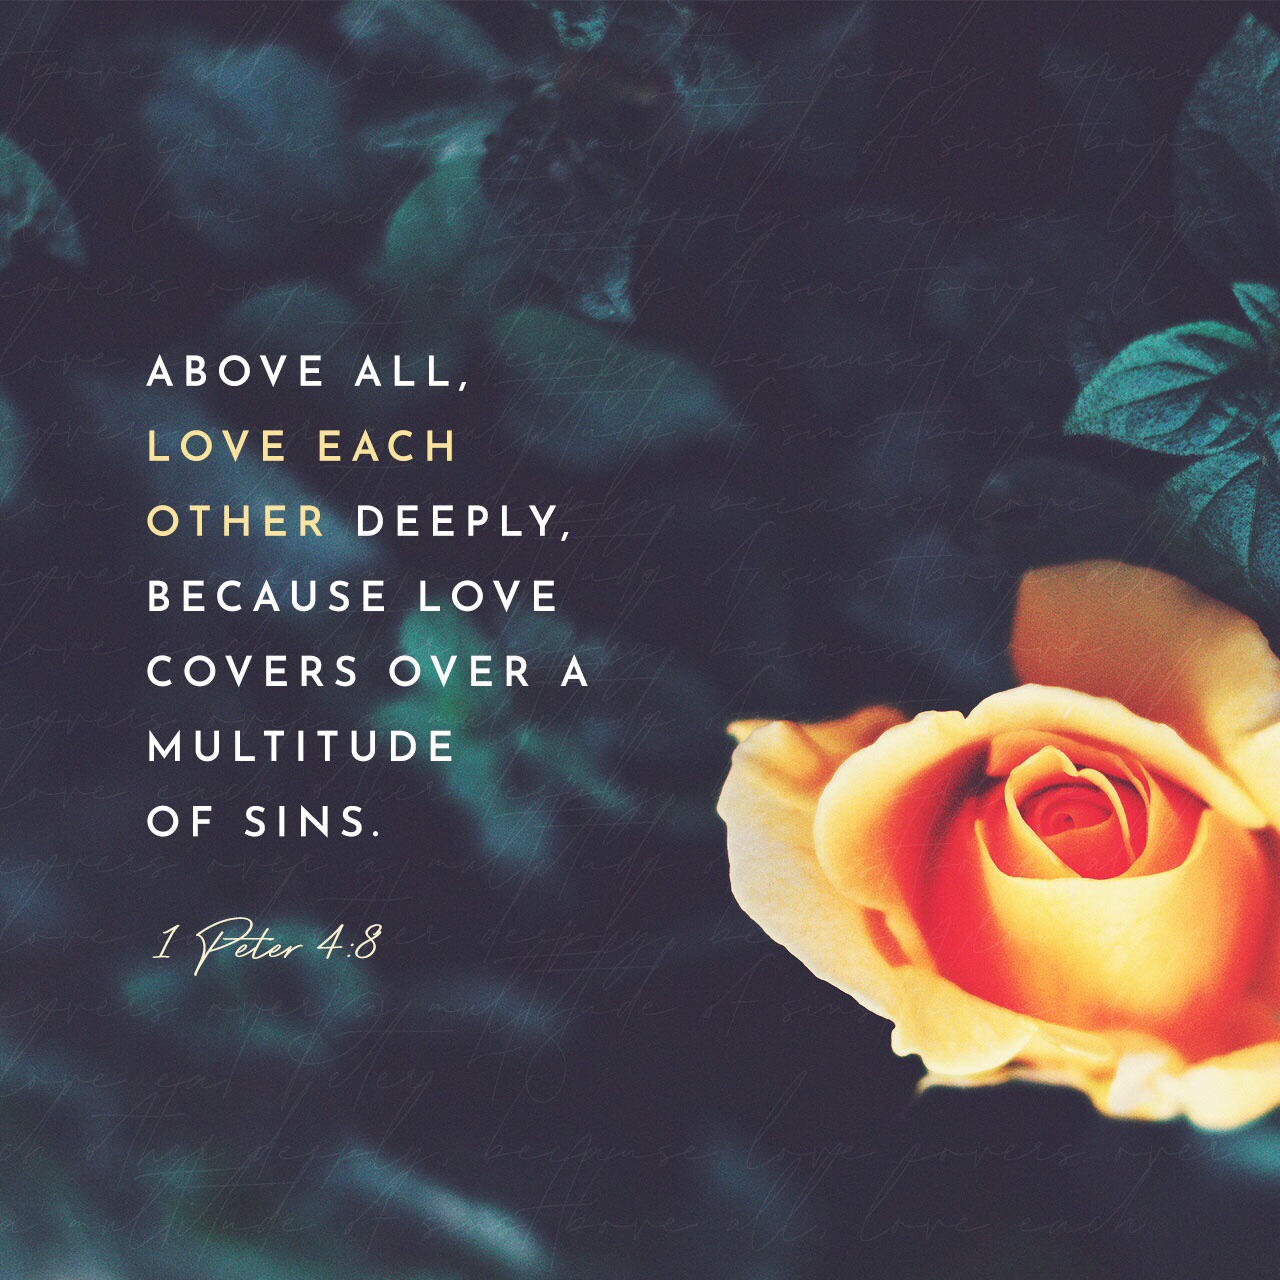 VOTD June 13, 2019 “Above all, keep fervent in your love for one another, because love covers a multitude of sins.” ‭‭1 PETER‬ ‭4:8‬ ‭NASB‬‬